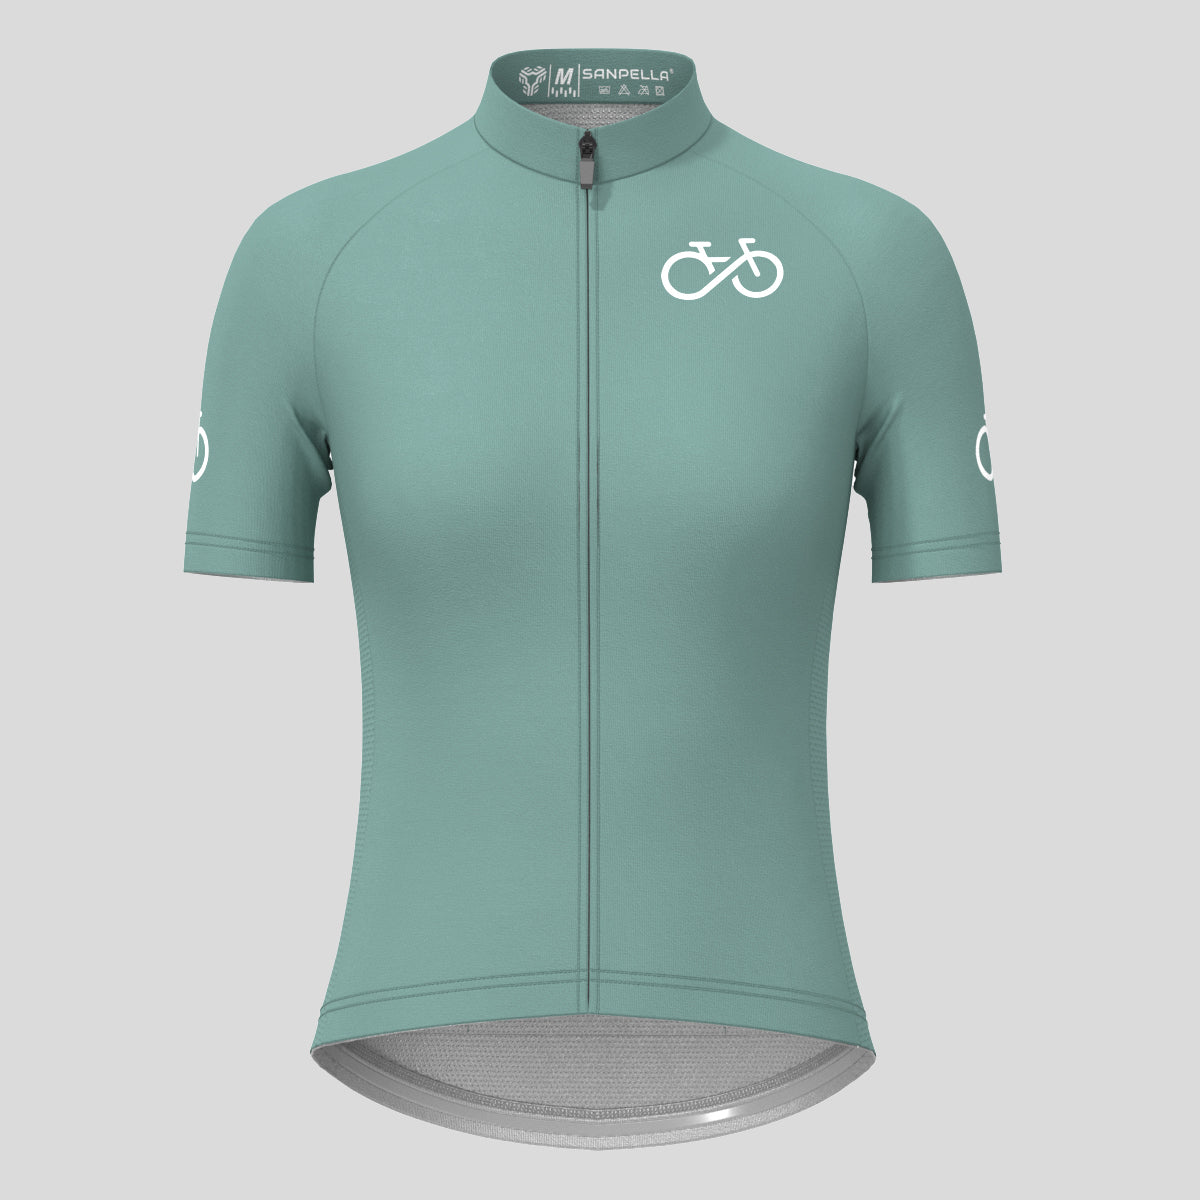 Ride Forever Women's Cycling Jersey - Sage